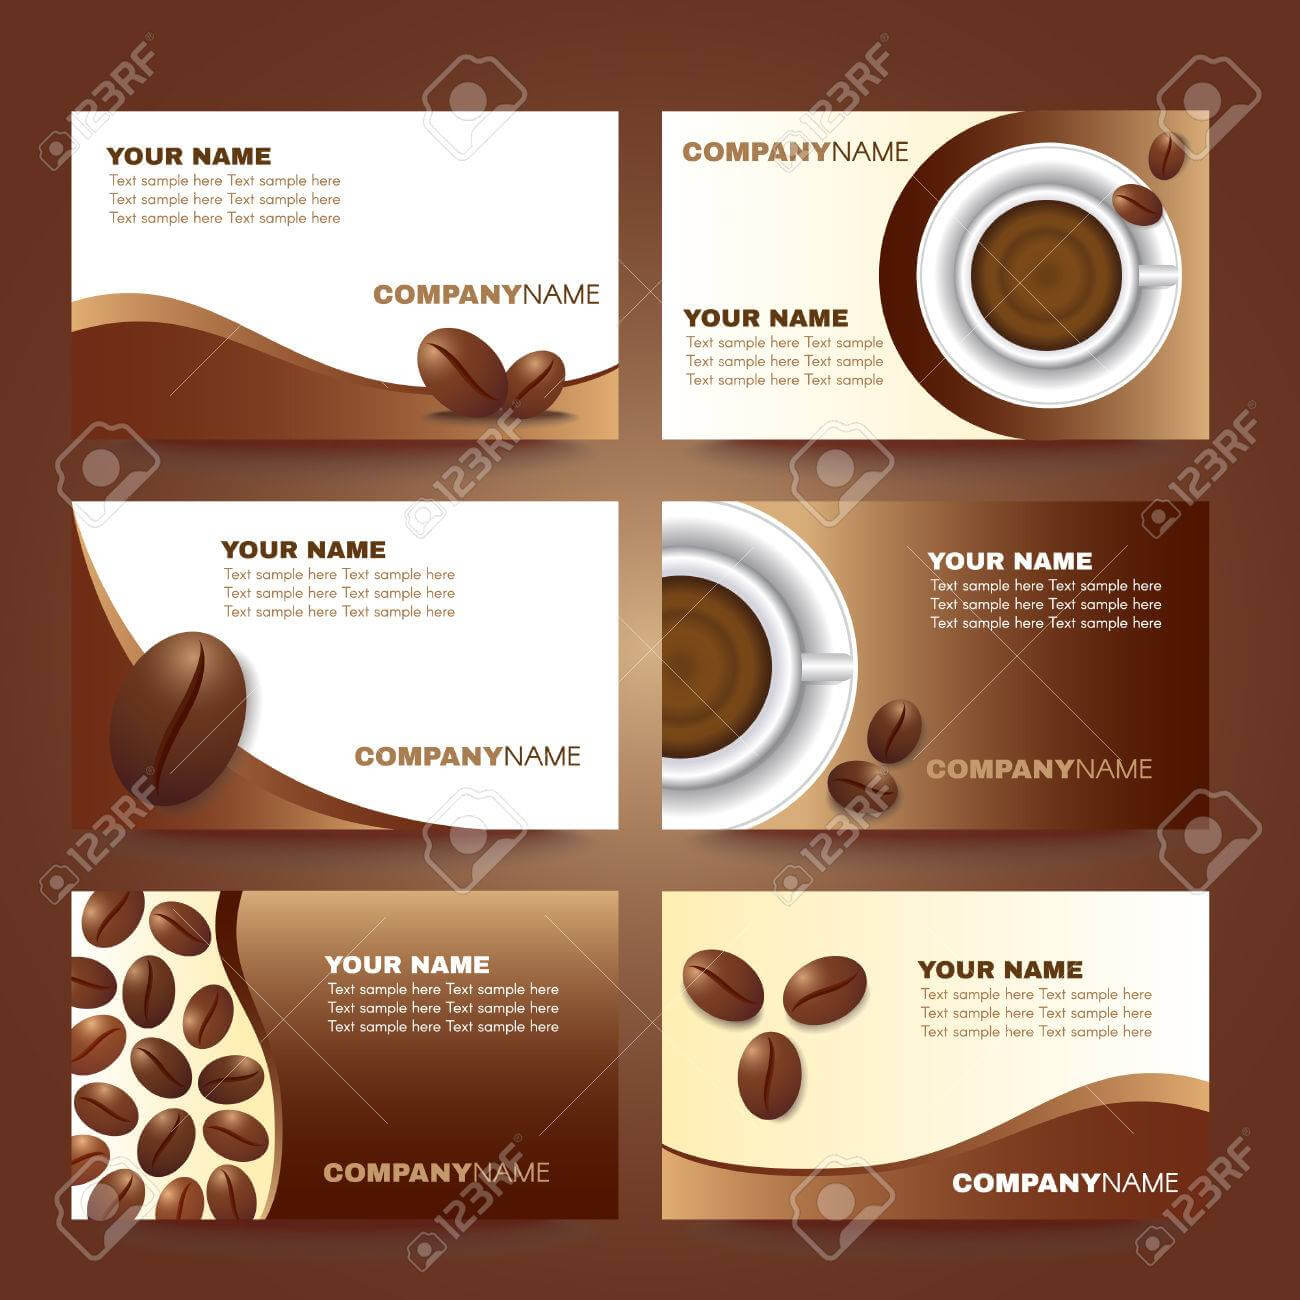 Ibm Business Card Template